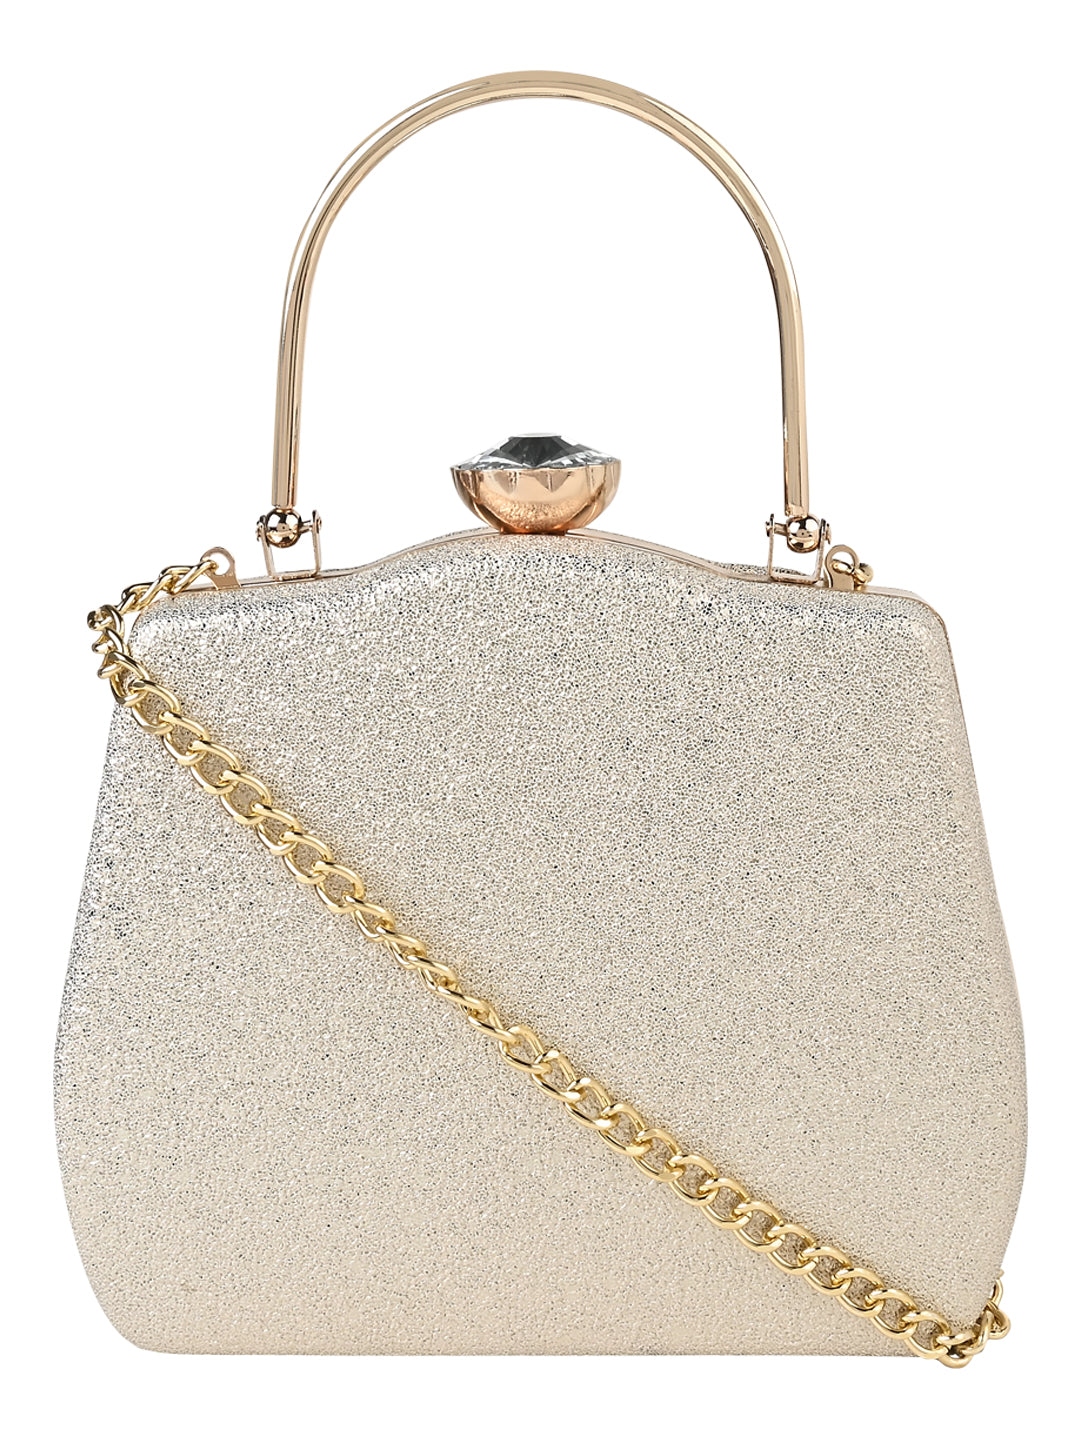 A plain gold clutch with a gold chain handle by Vdesi.